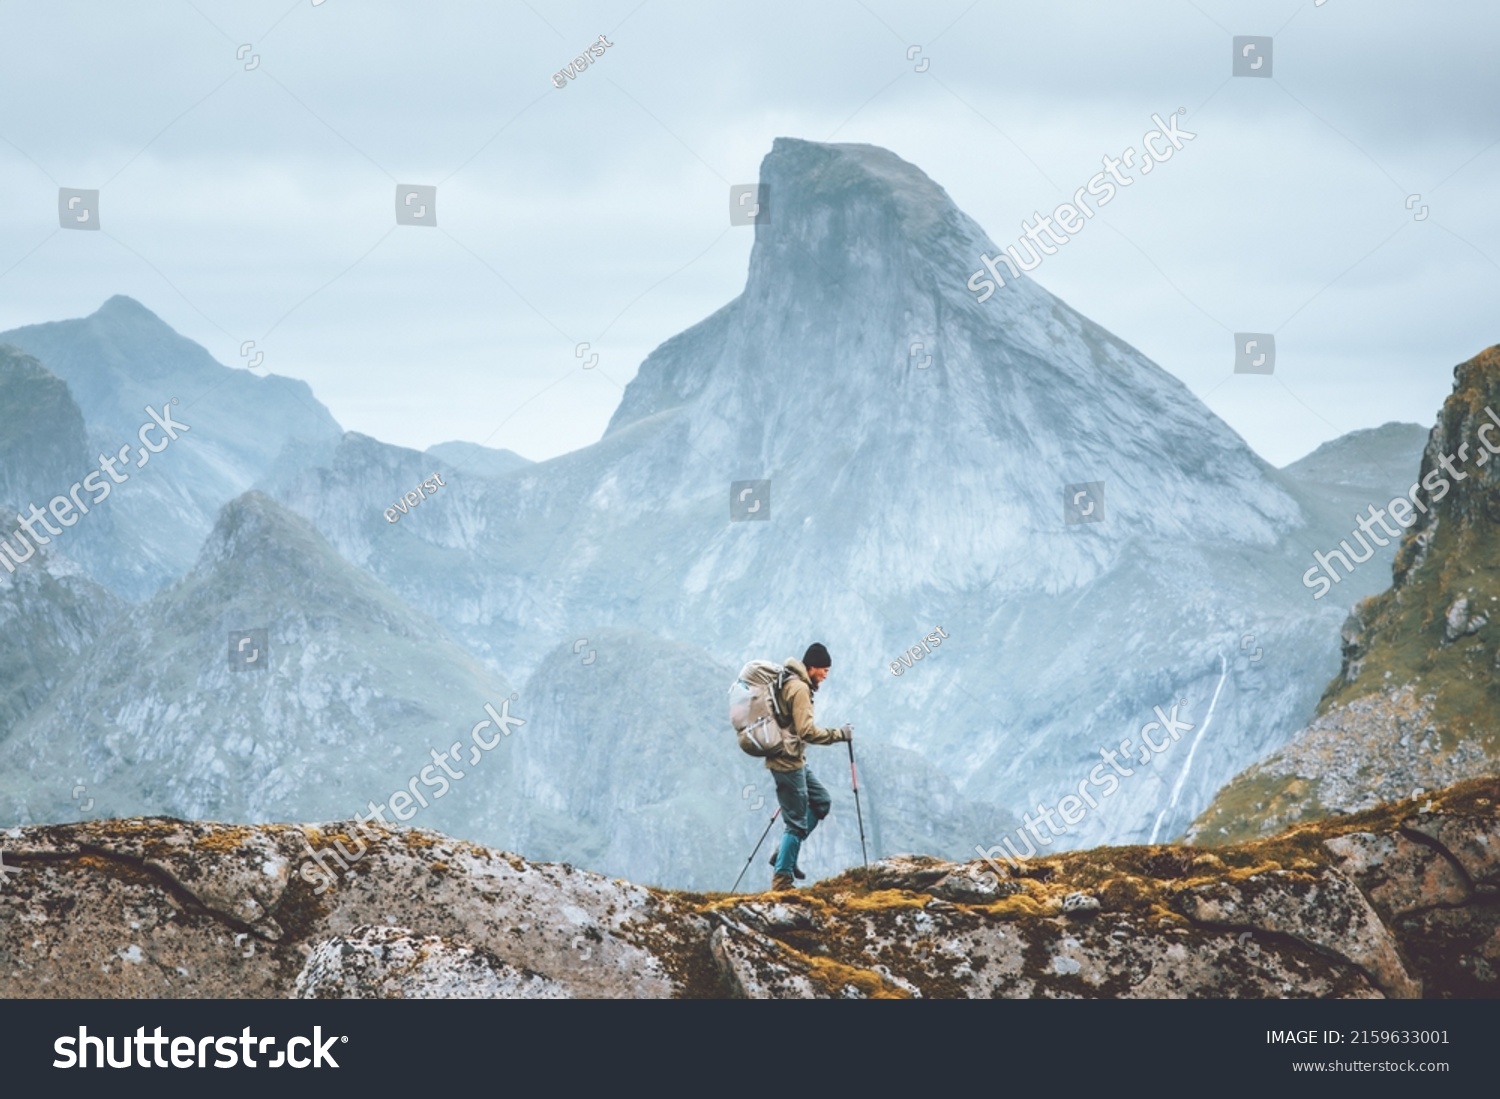 Man hiking in mountains traveling solo with backpack outdoor active vacations in Norway healthy lifestyle extreme sports #2159633001